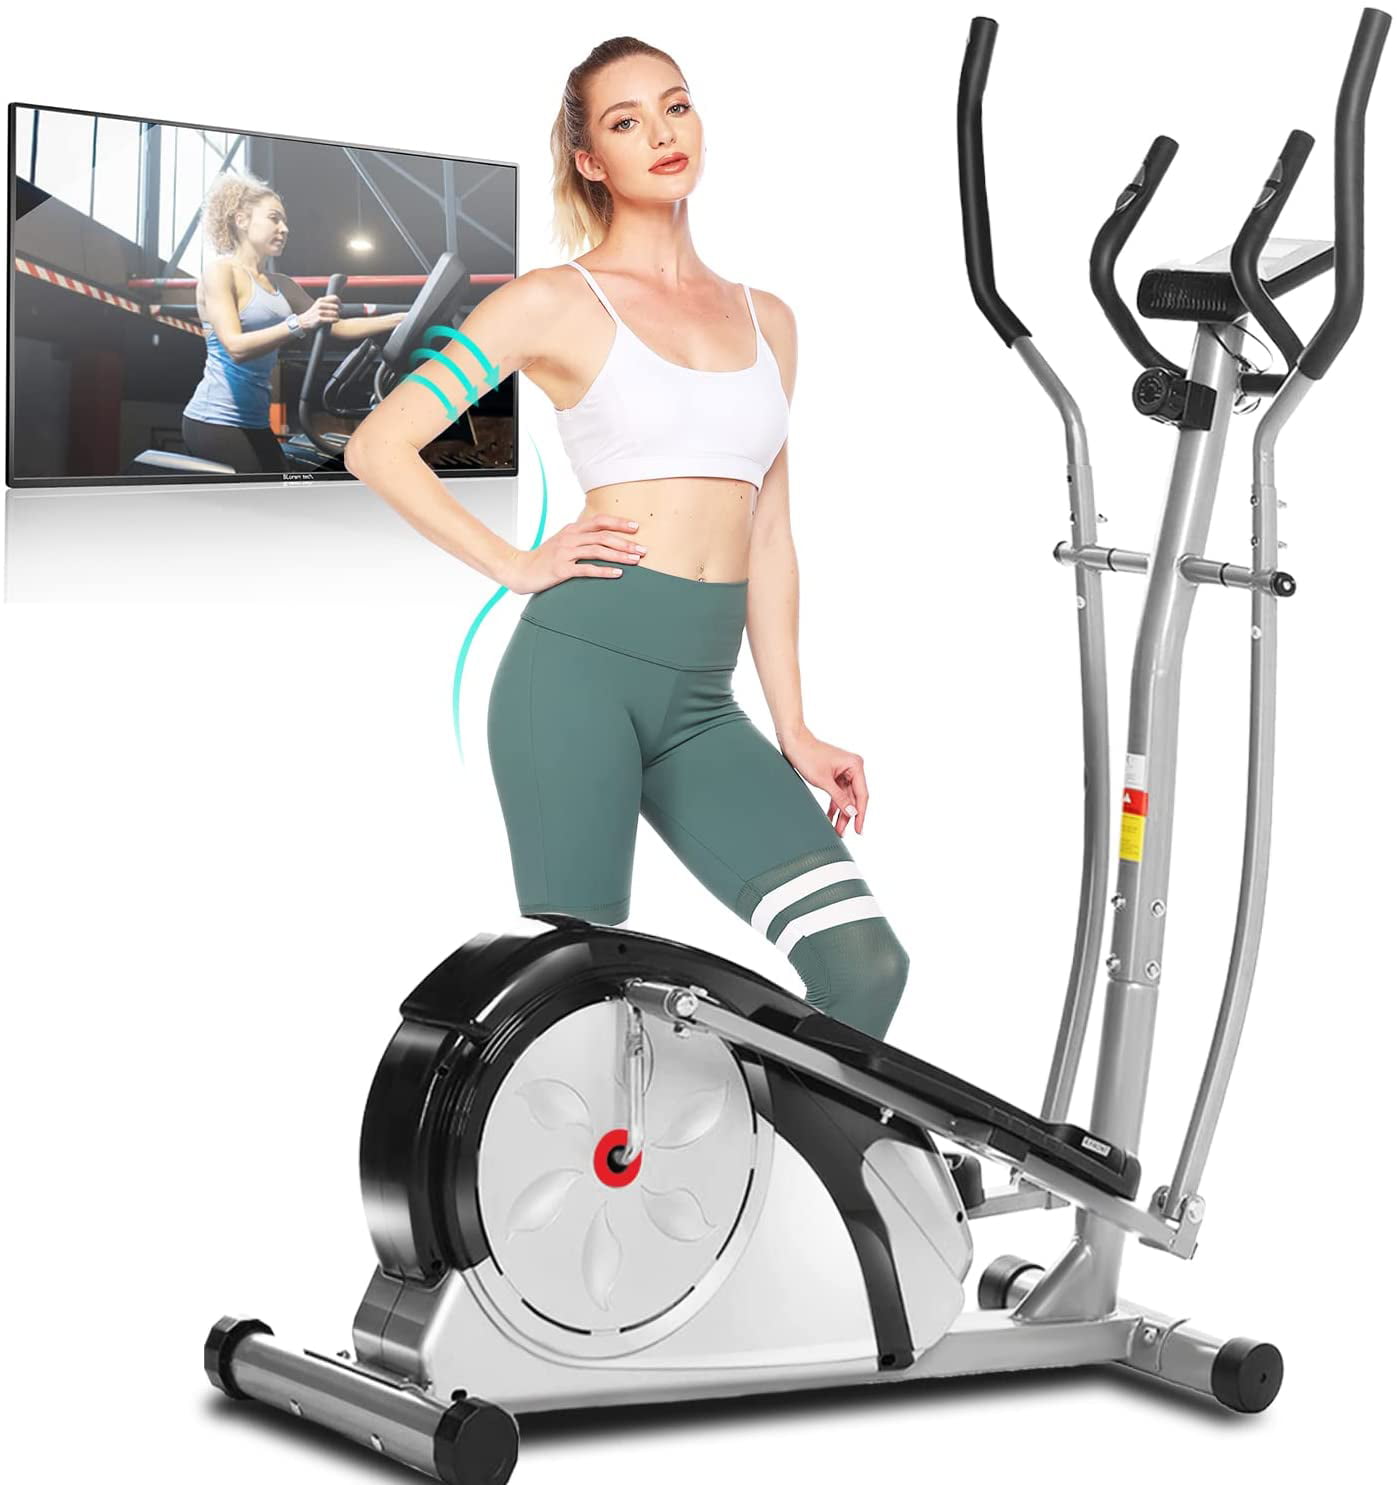 ANCHEER Magnetic Elliptical Exercise Fitness Training Machine Home Cardio B h 